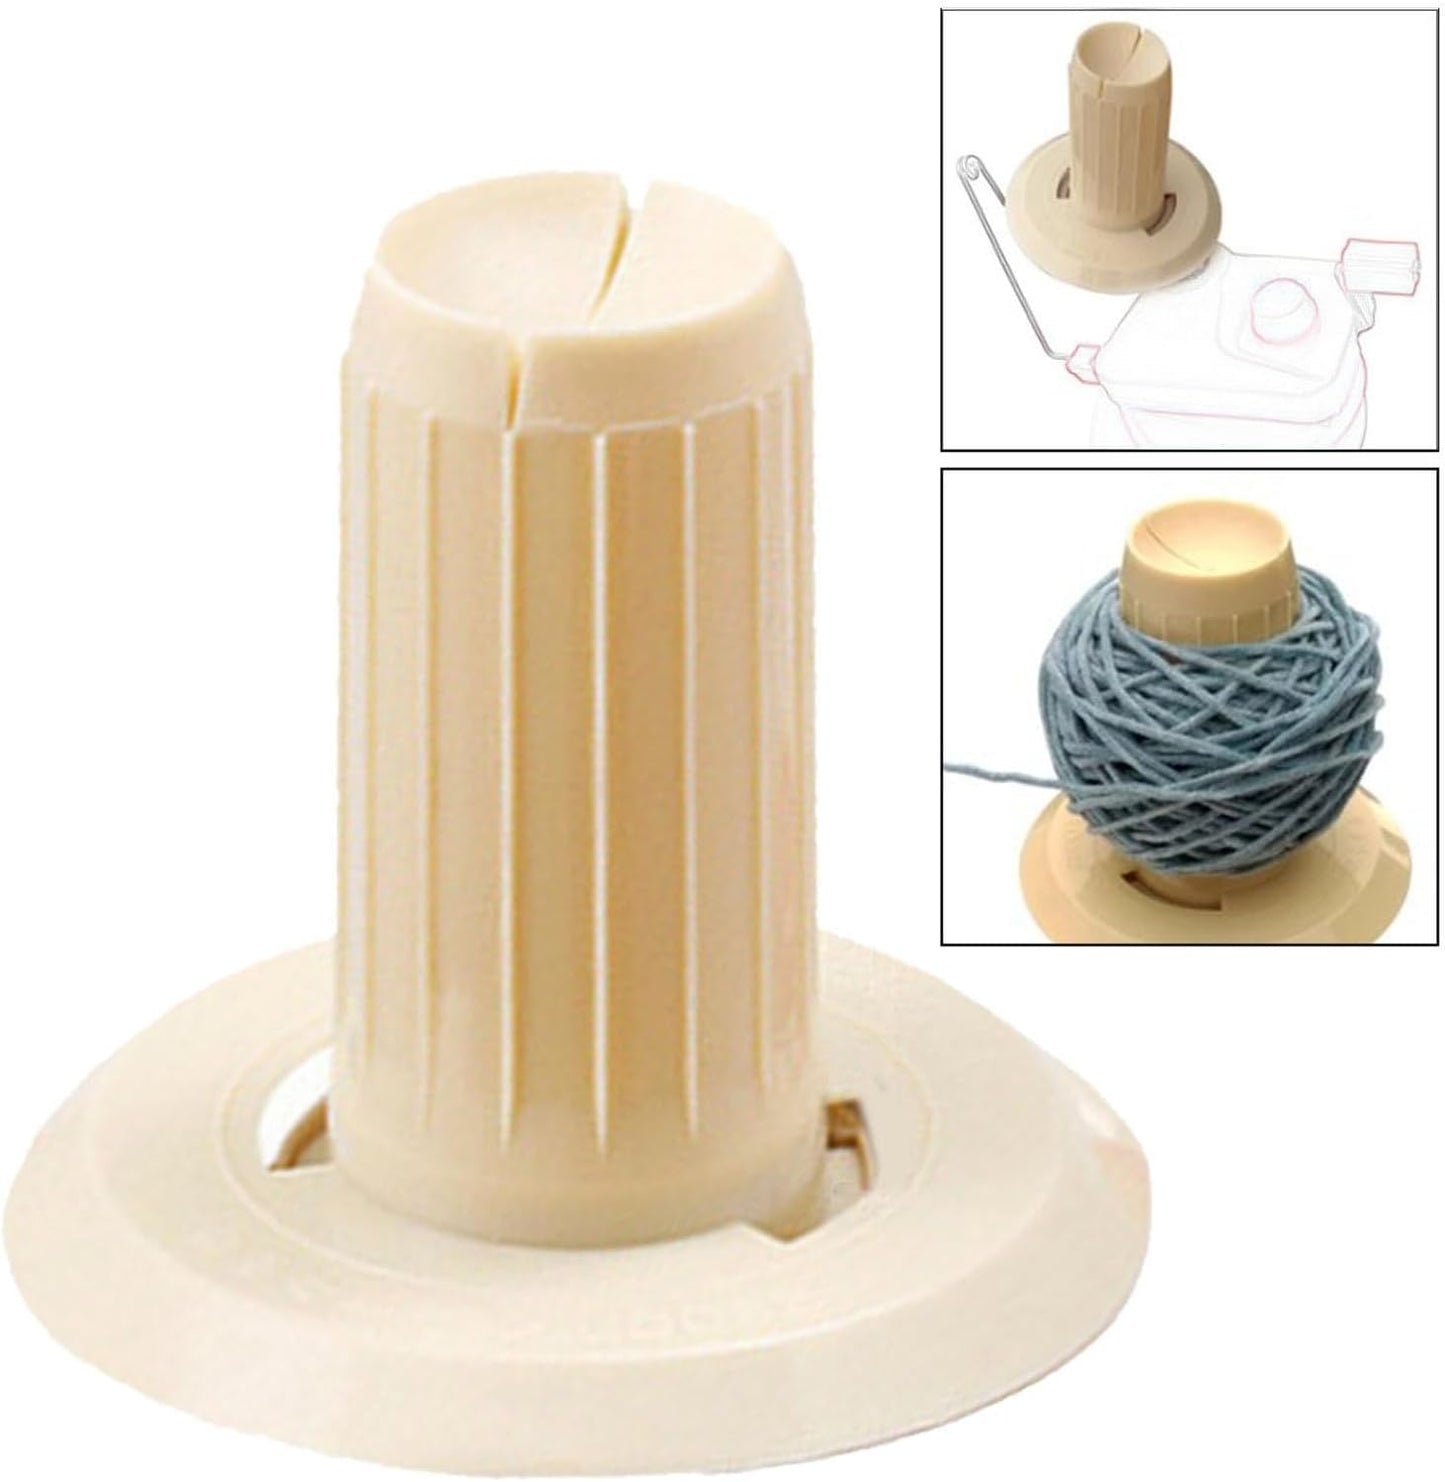 Sewing Yarn Ball Winder Part Wool Winder Reel DIY Sewing Thread Spindle Base Supplies Winding Head Replacement for Knitting